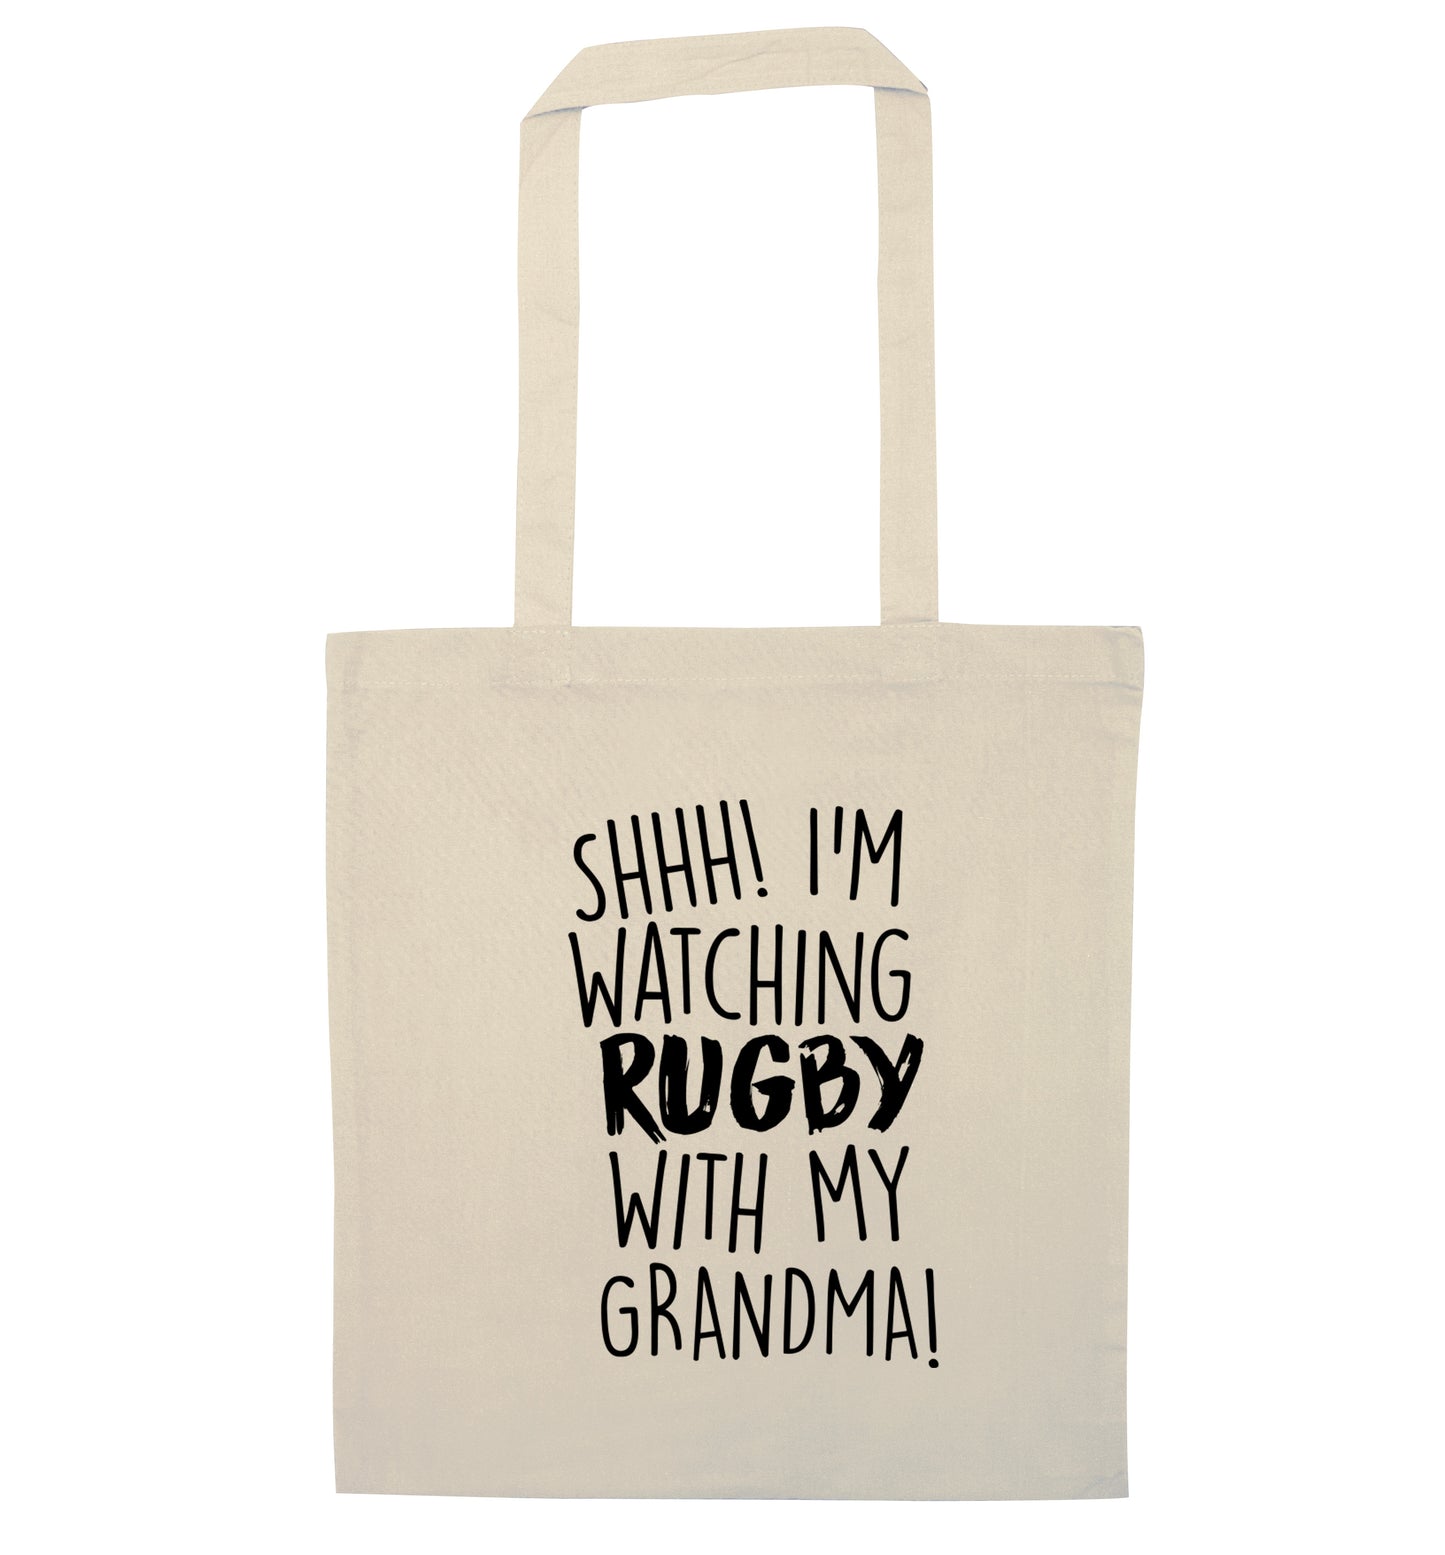 Shh I'm watching rugby with my grandma natural tote bag